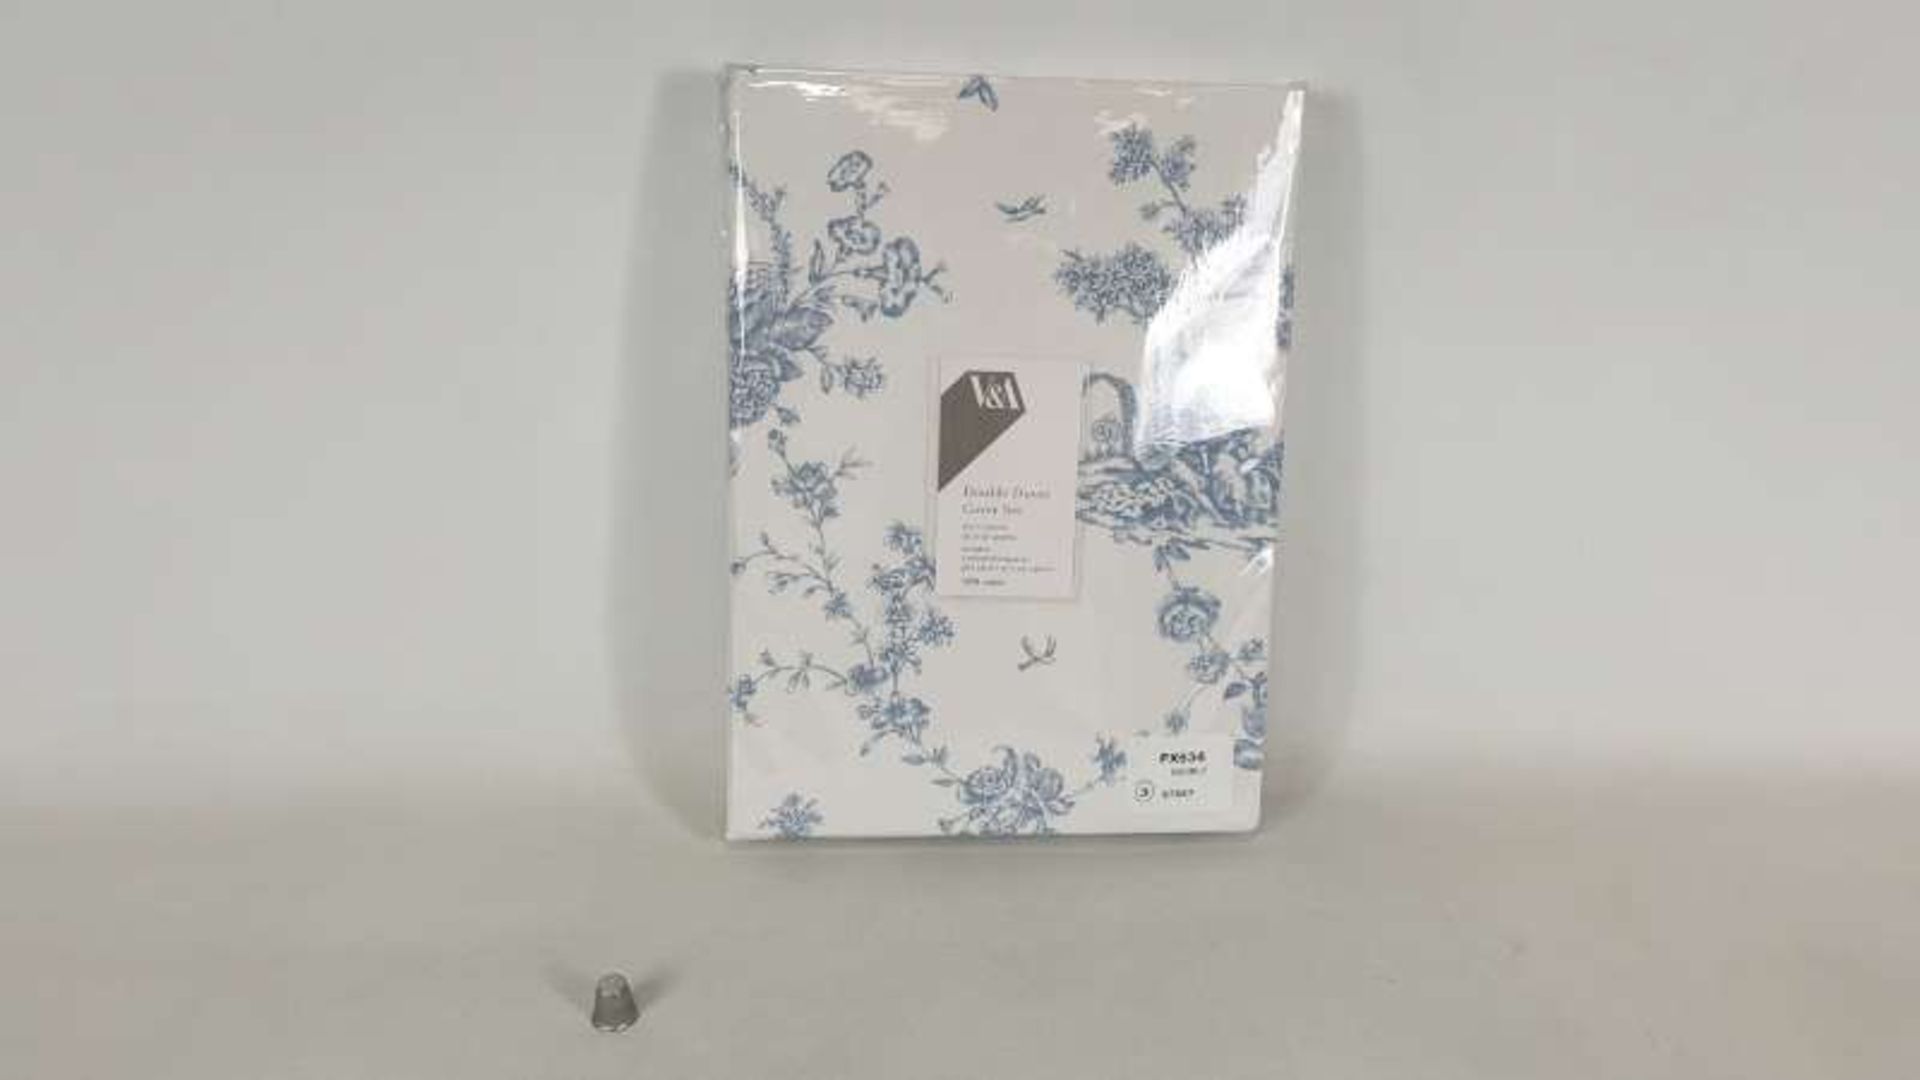 14 X V&A GARDEN OF LOVE DOUBLE DUVET COVER SETS IN 2 BOXES